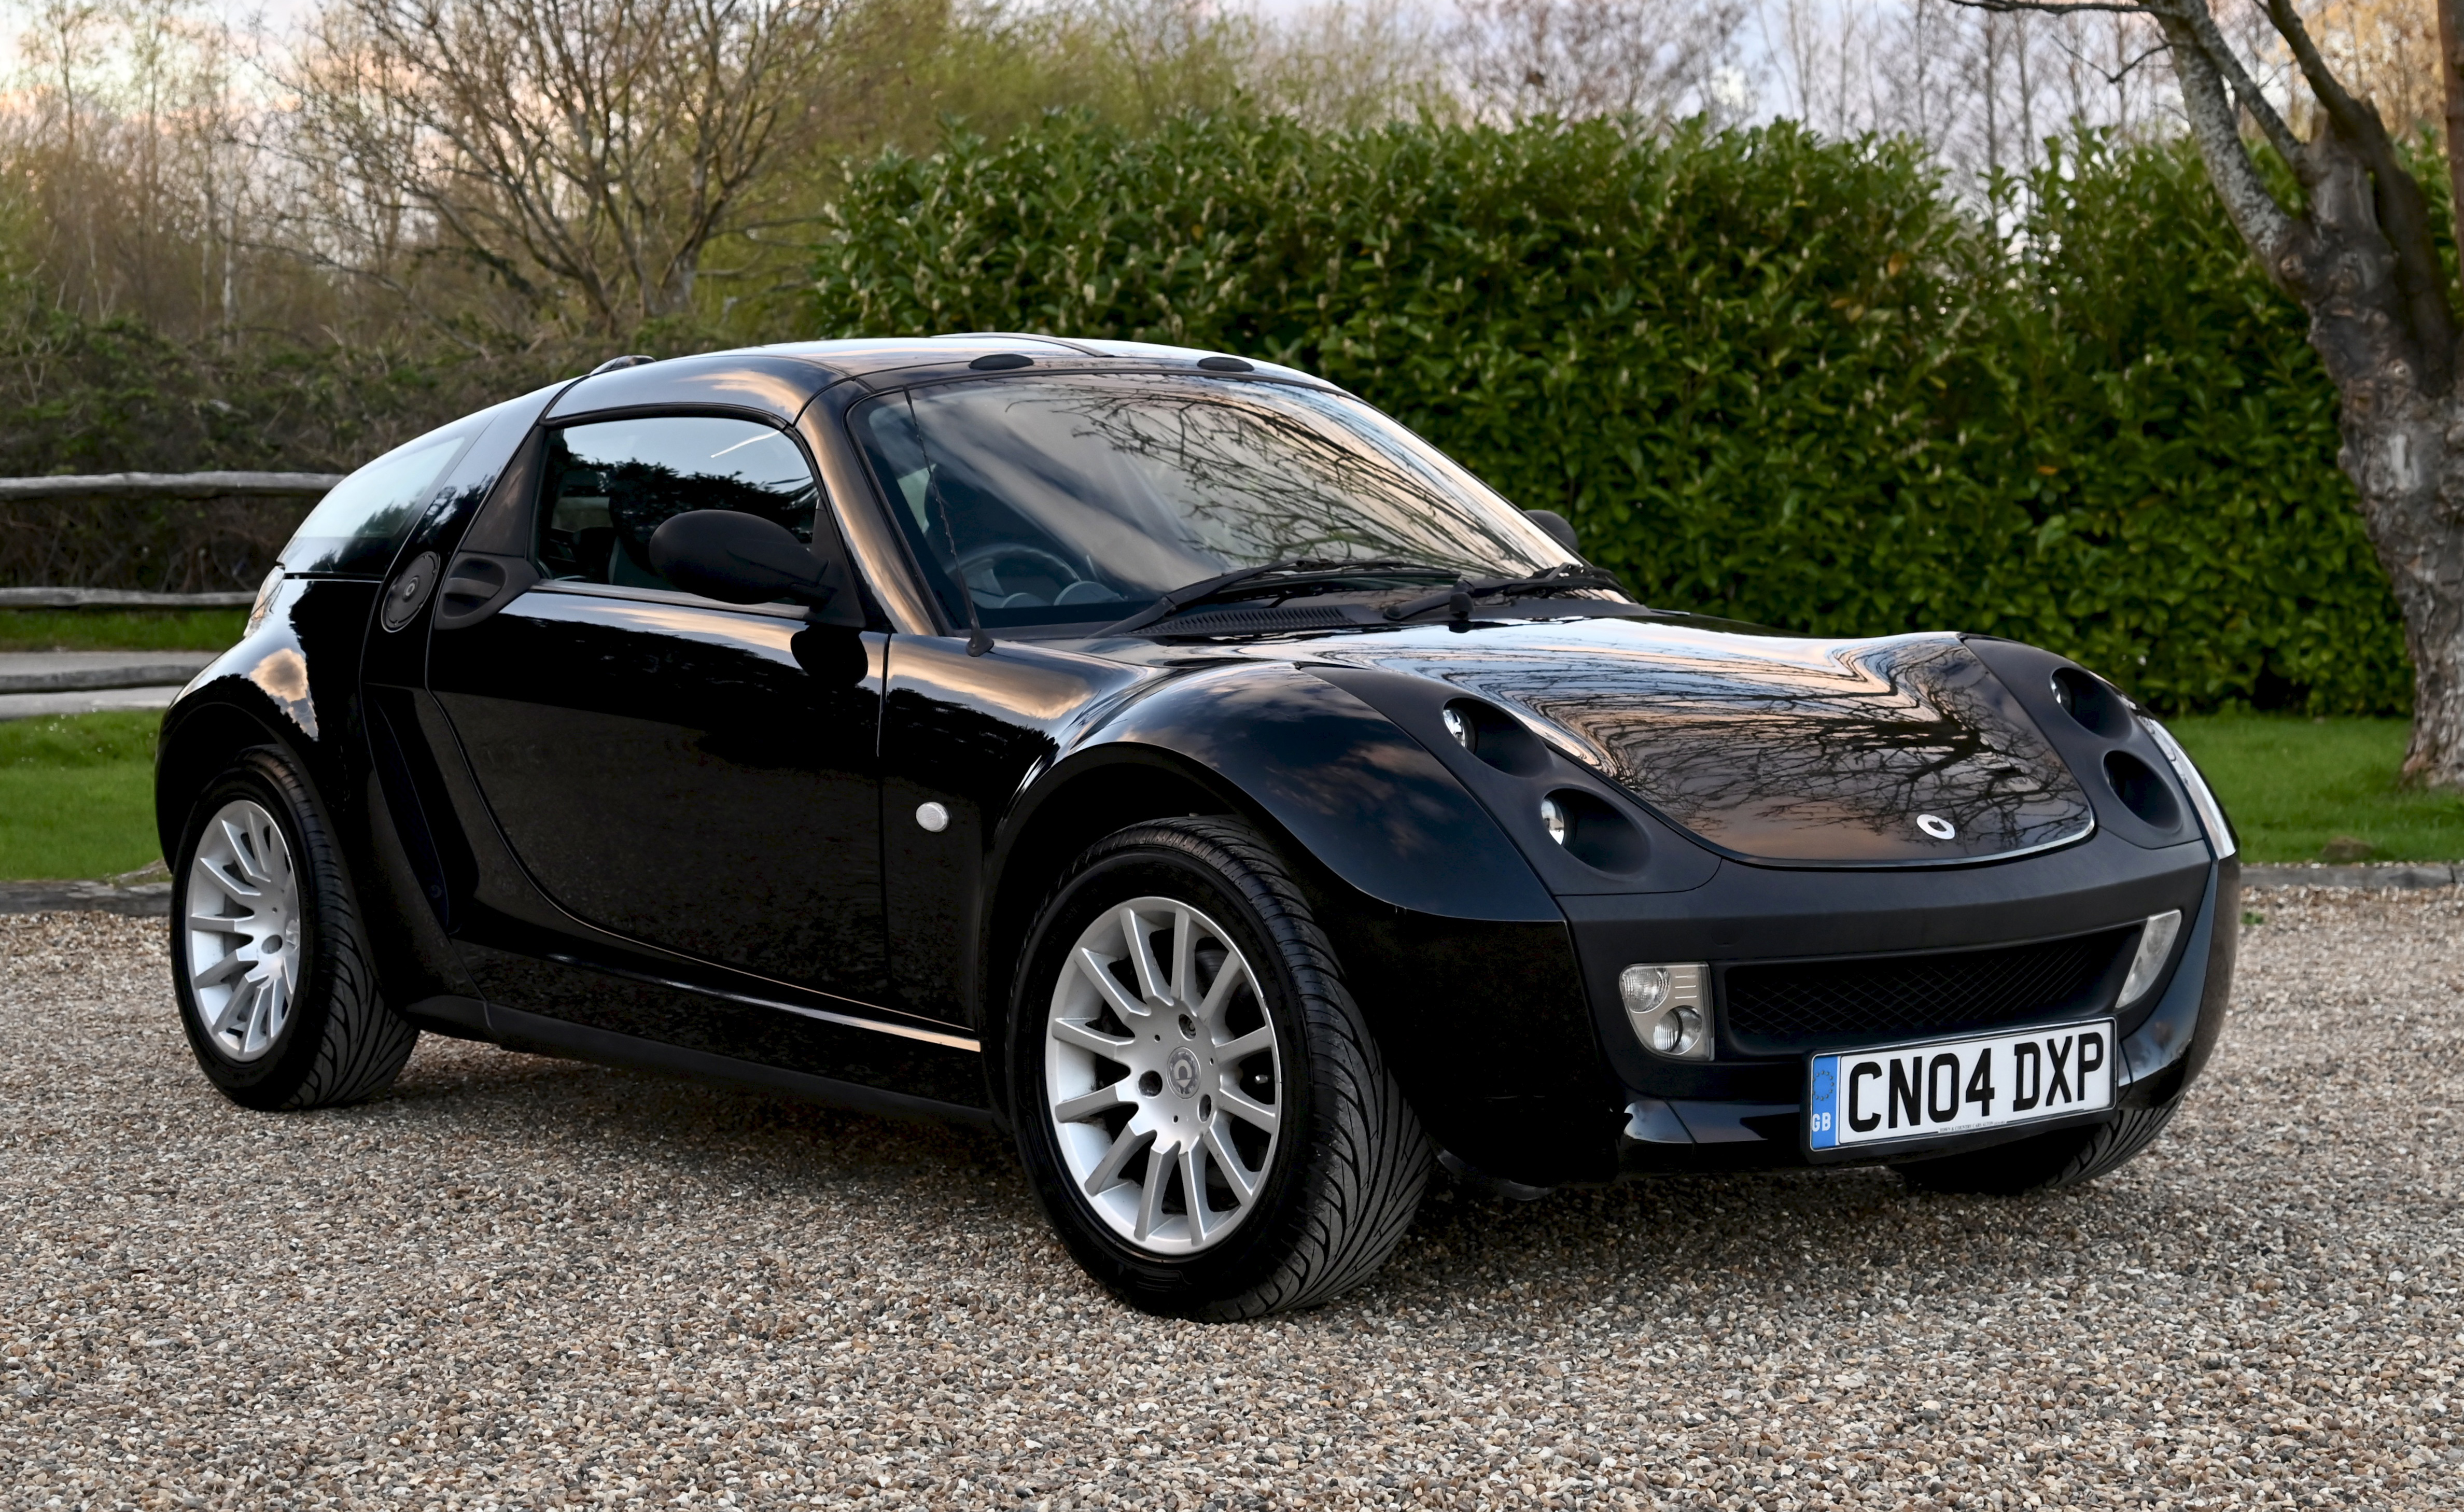 2004 Smart Roadster Coupe 80 Automatic. Registration number: CN04 DXP. To satisfy your knowledge